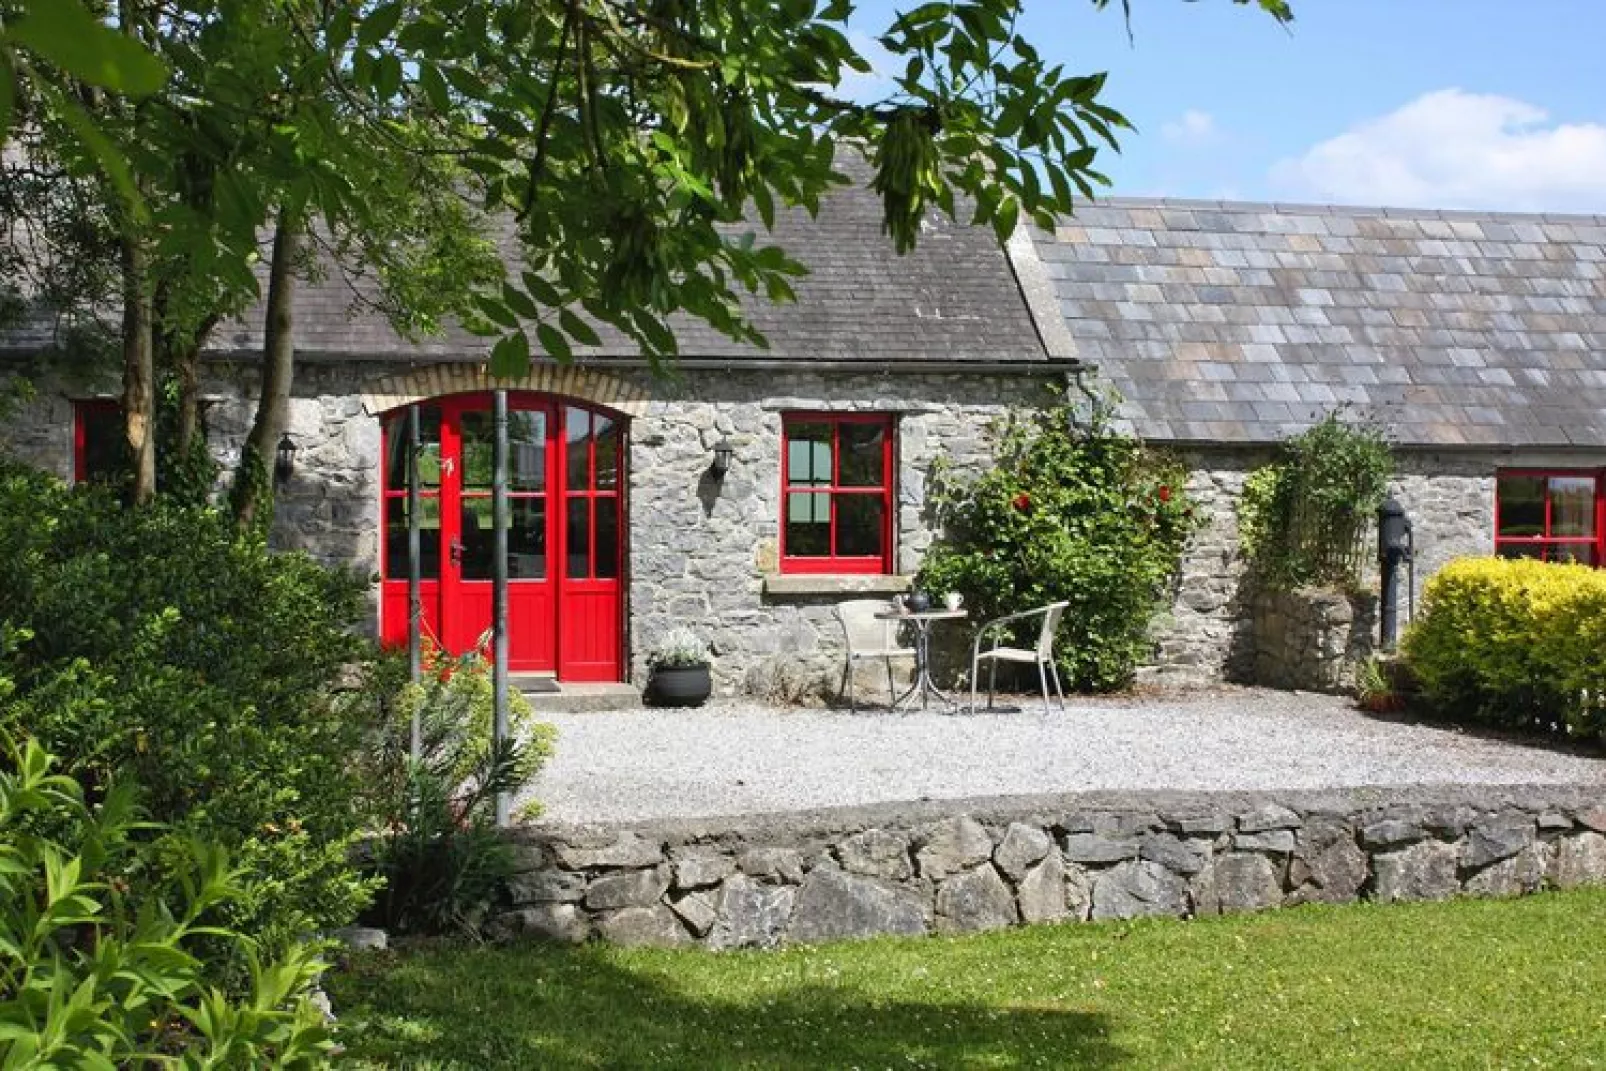 Semi-detached house The Granary in Terryglass Co Tipperary-Buitenkant zomer